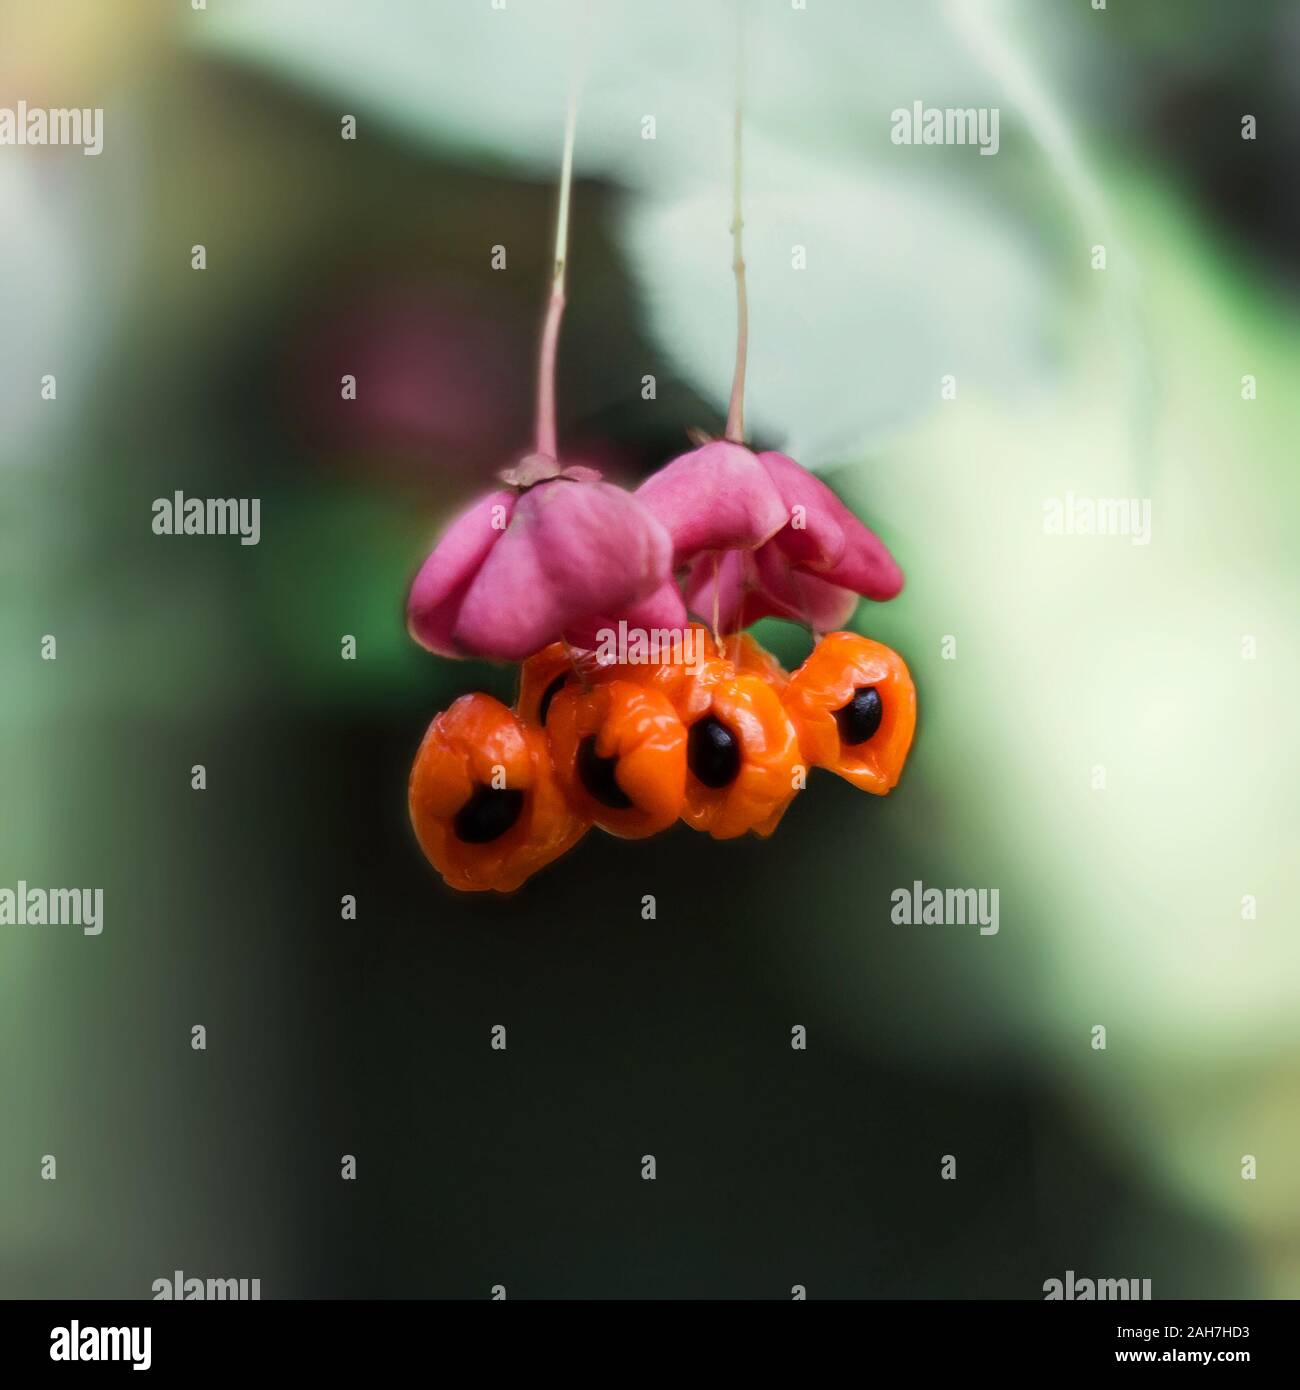 Euonymus, spindle tree, wahoo on green background. Bright pink flower with orange fruit and black seed. Close up macro. Poisonous plant. Stock Photo